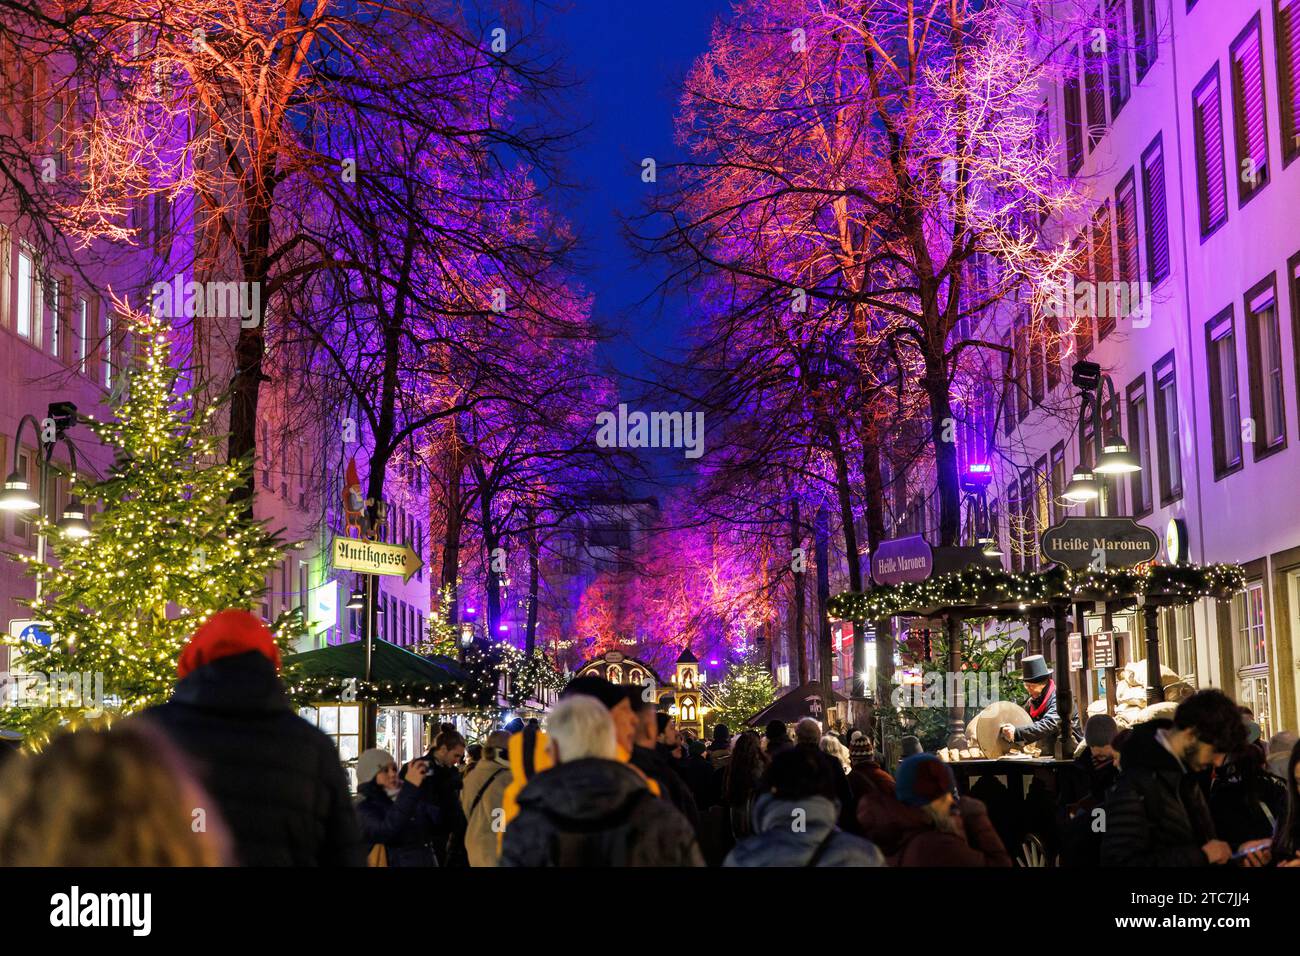 the Christmas market Heinzels Wintermaerchen on Alter Markt and Heumarkt in the historic town, illuminated trees on the street Unter Kaester, Cologne, Stock Photo